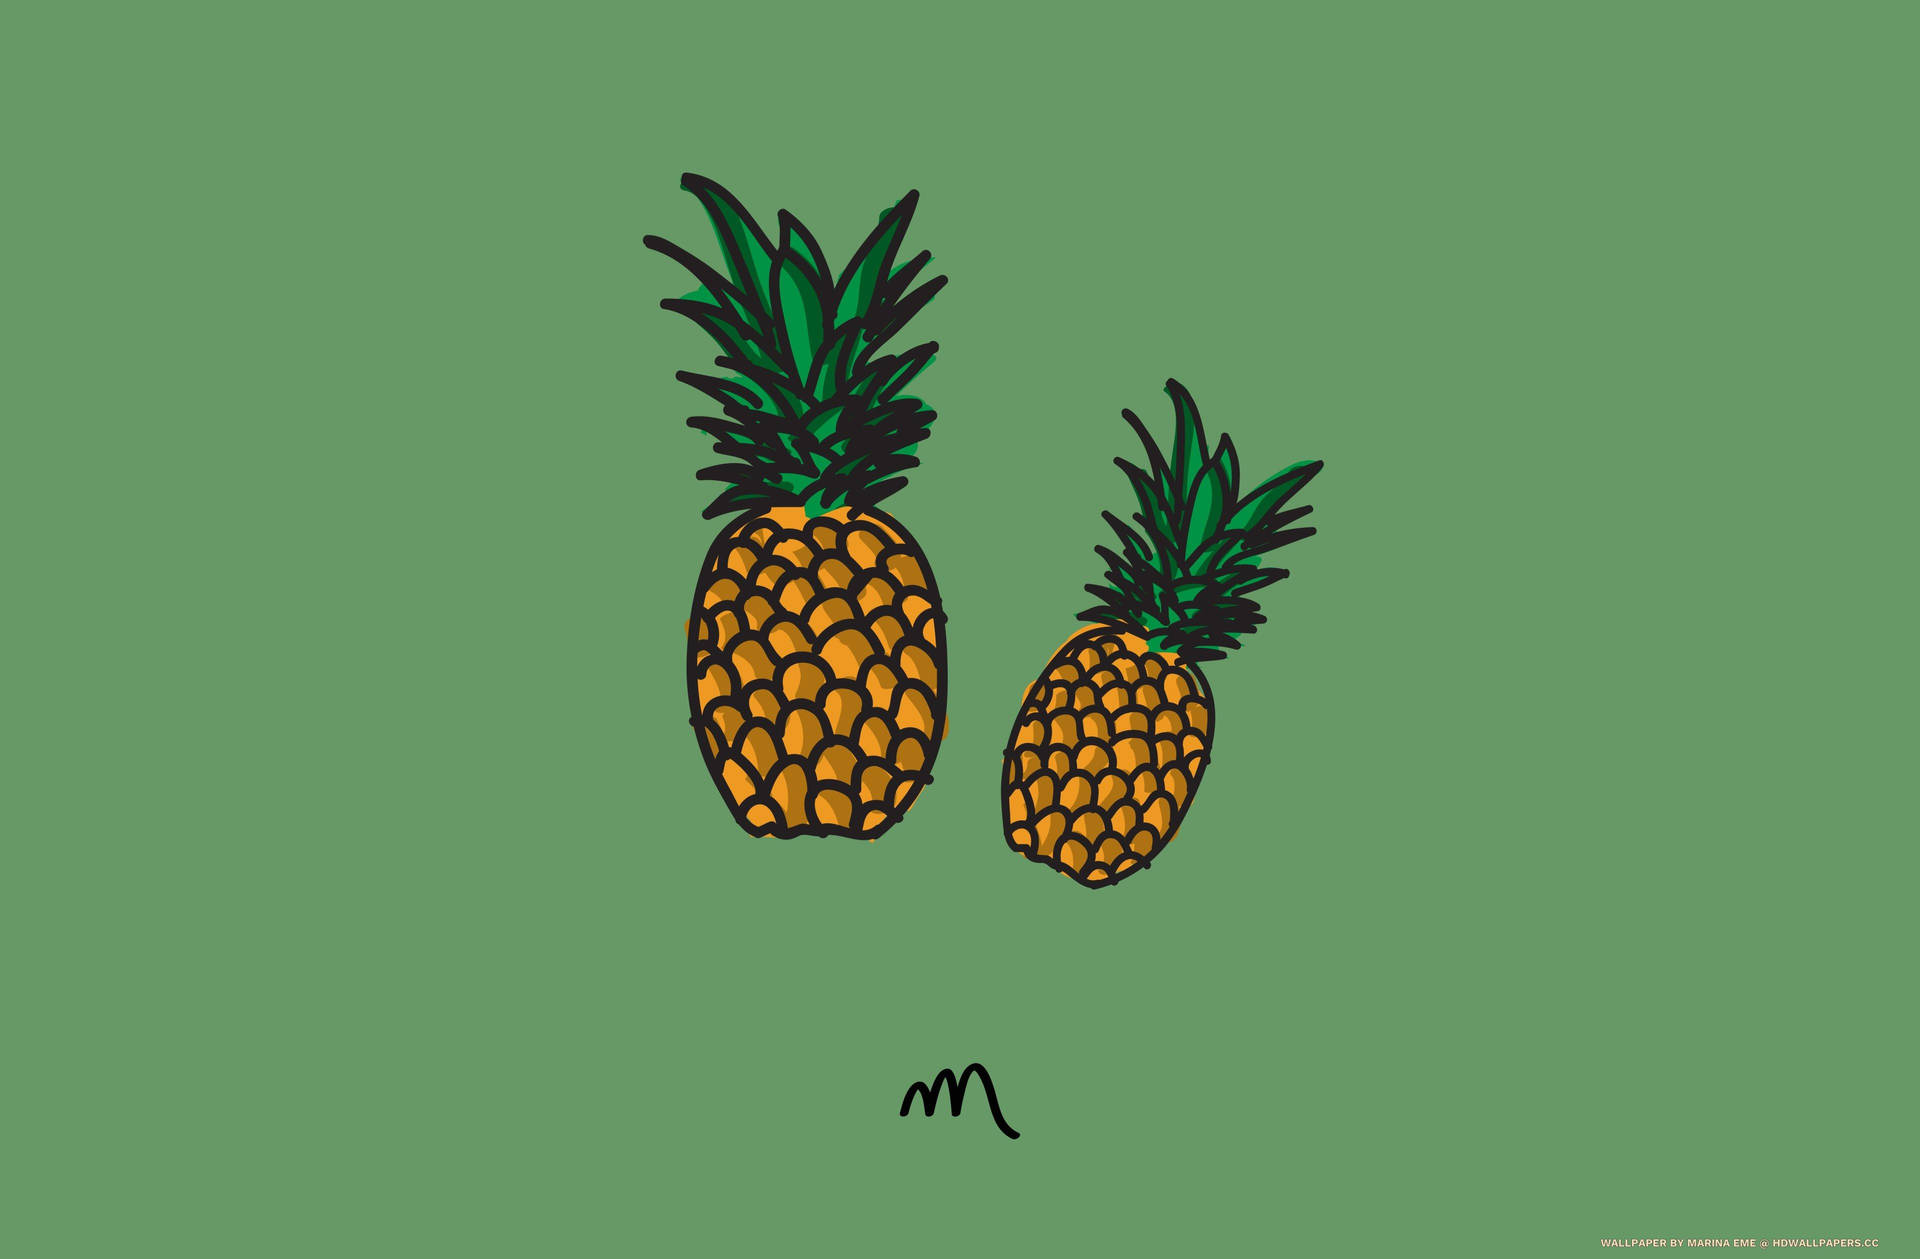 A Refreshing Pineapple Standing Out Against A Green Backdrop Background